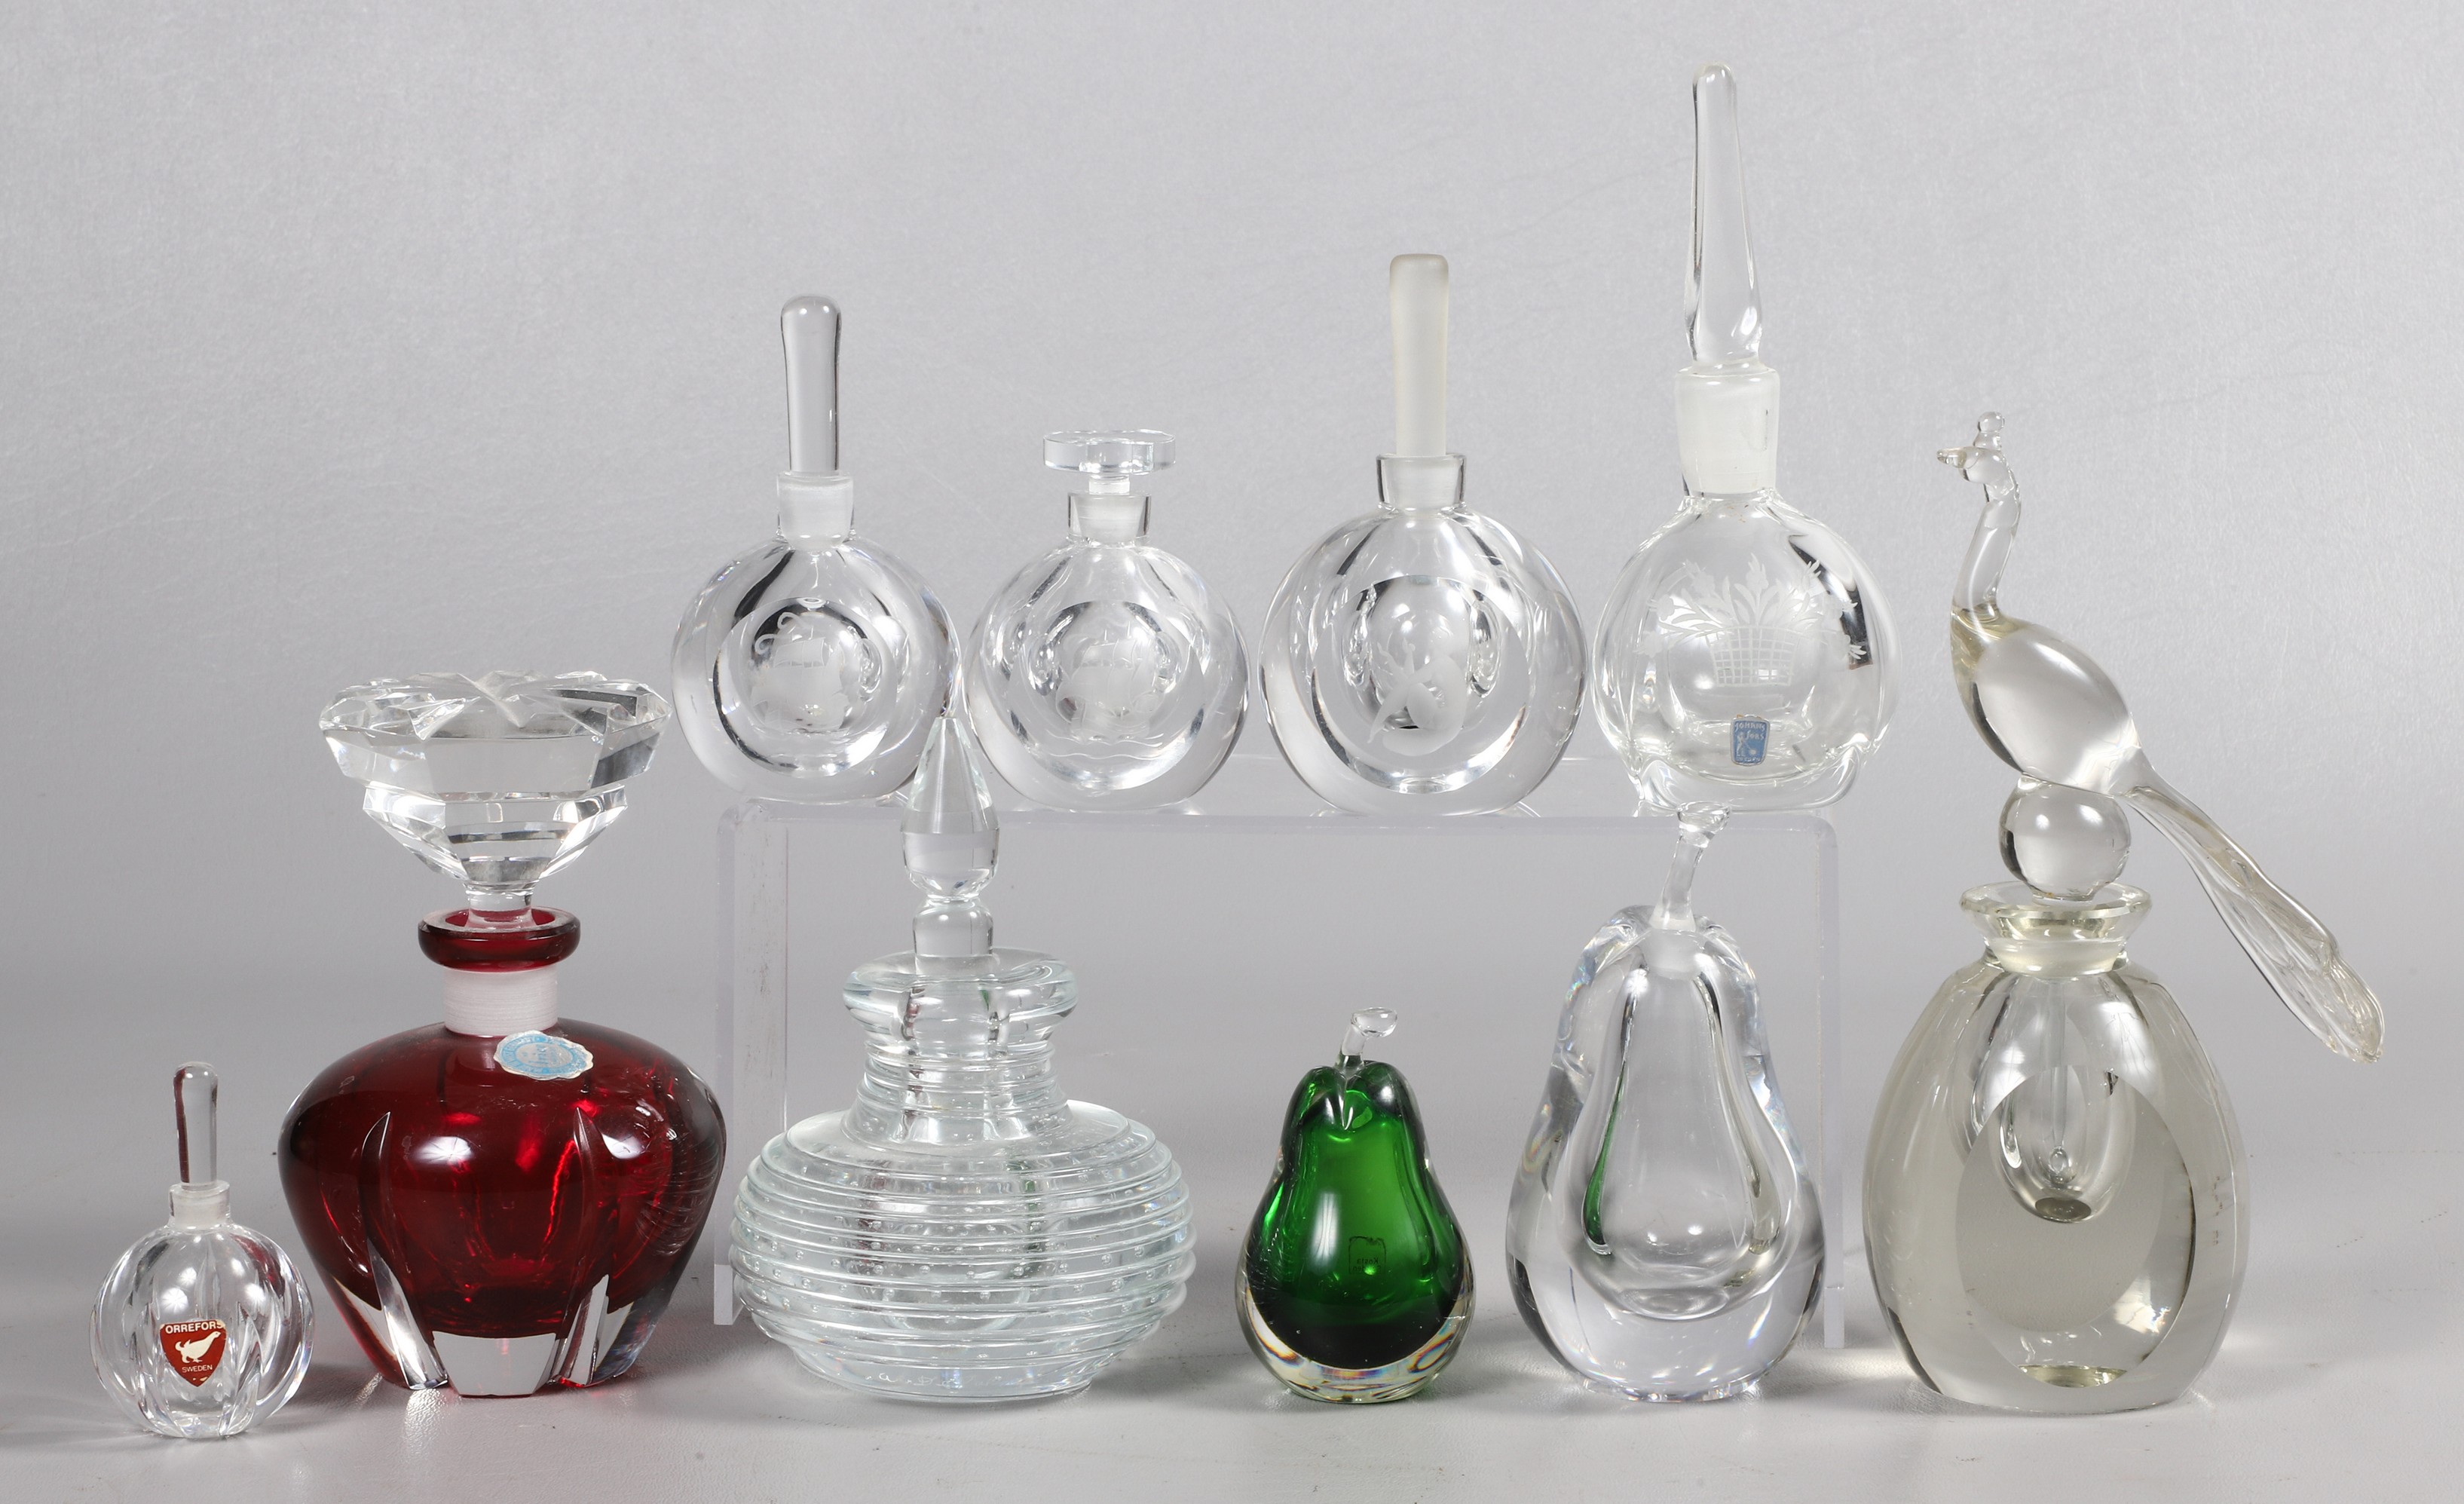  10 Scent bottles to include Orrefors 317e99